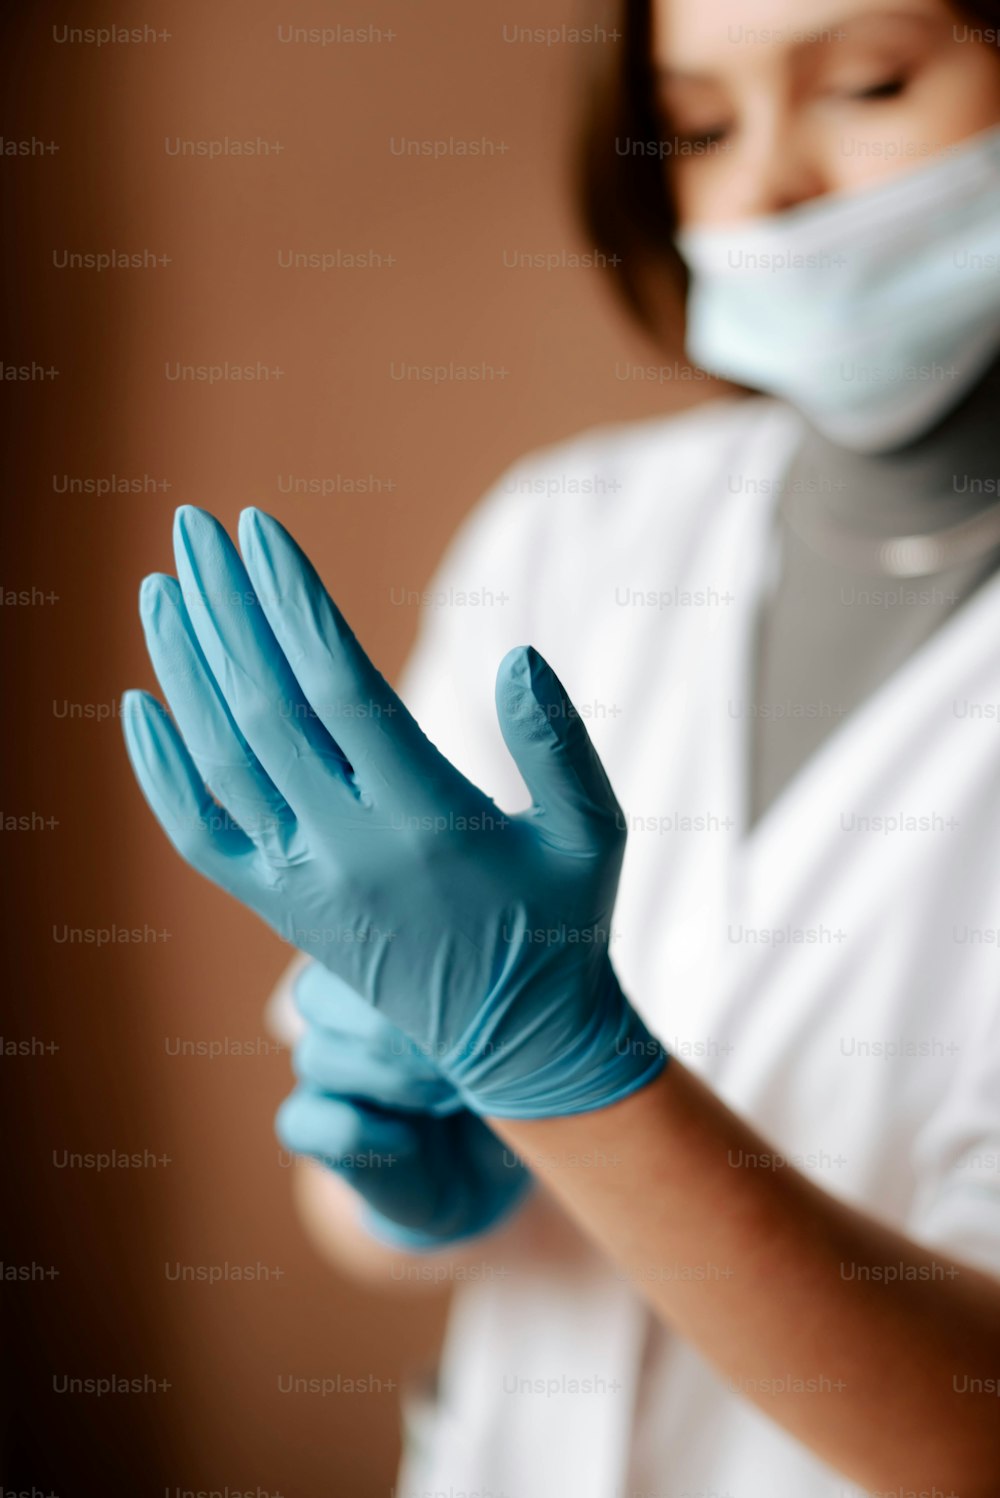 a woman wearing blue gloves and a face mask